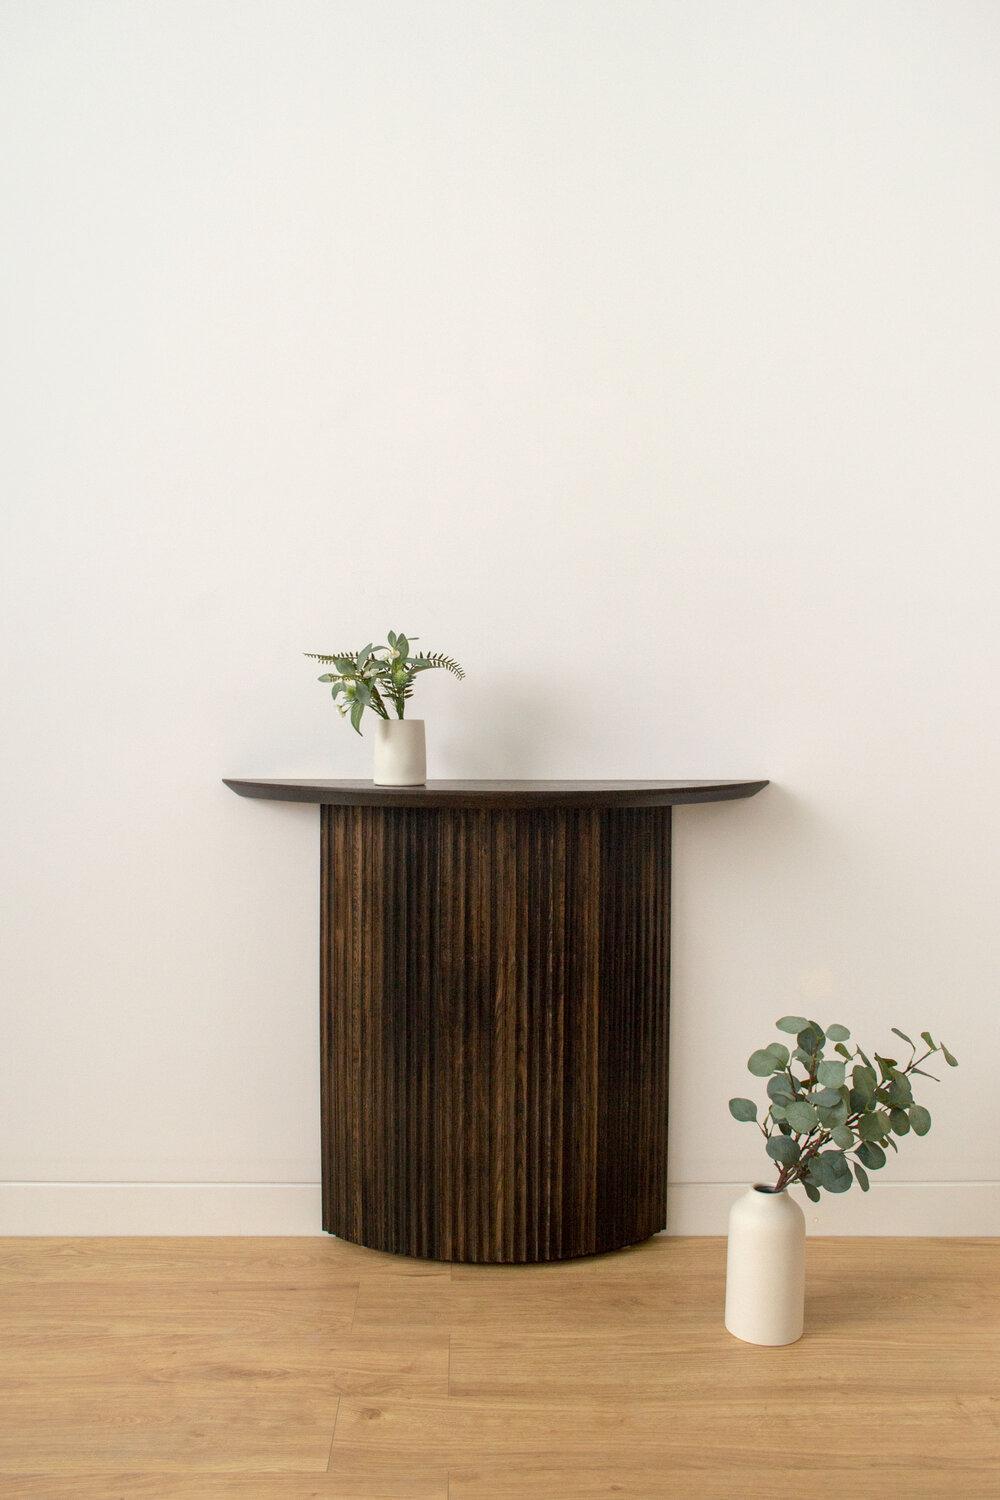 Pilar Demilune console table by Indo Made
One of a kind
Dimensions: L 106.7 x D 30.5 x H 91.4 cm
Materials: Oxidized oak.

Also available in different Oak and Maple finishes; and with a hardwood or stone top. Please contact us.
Each piece is